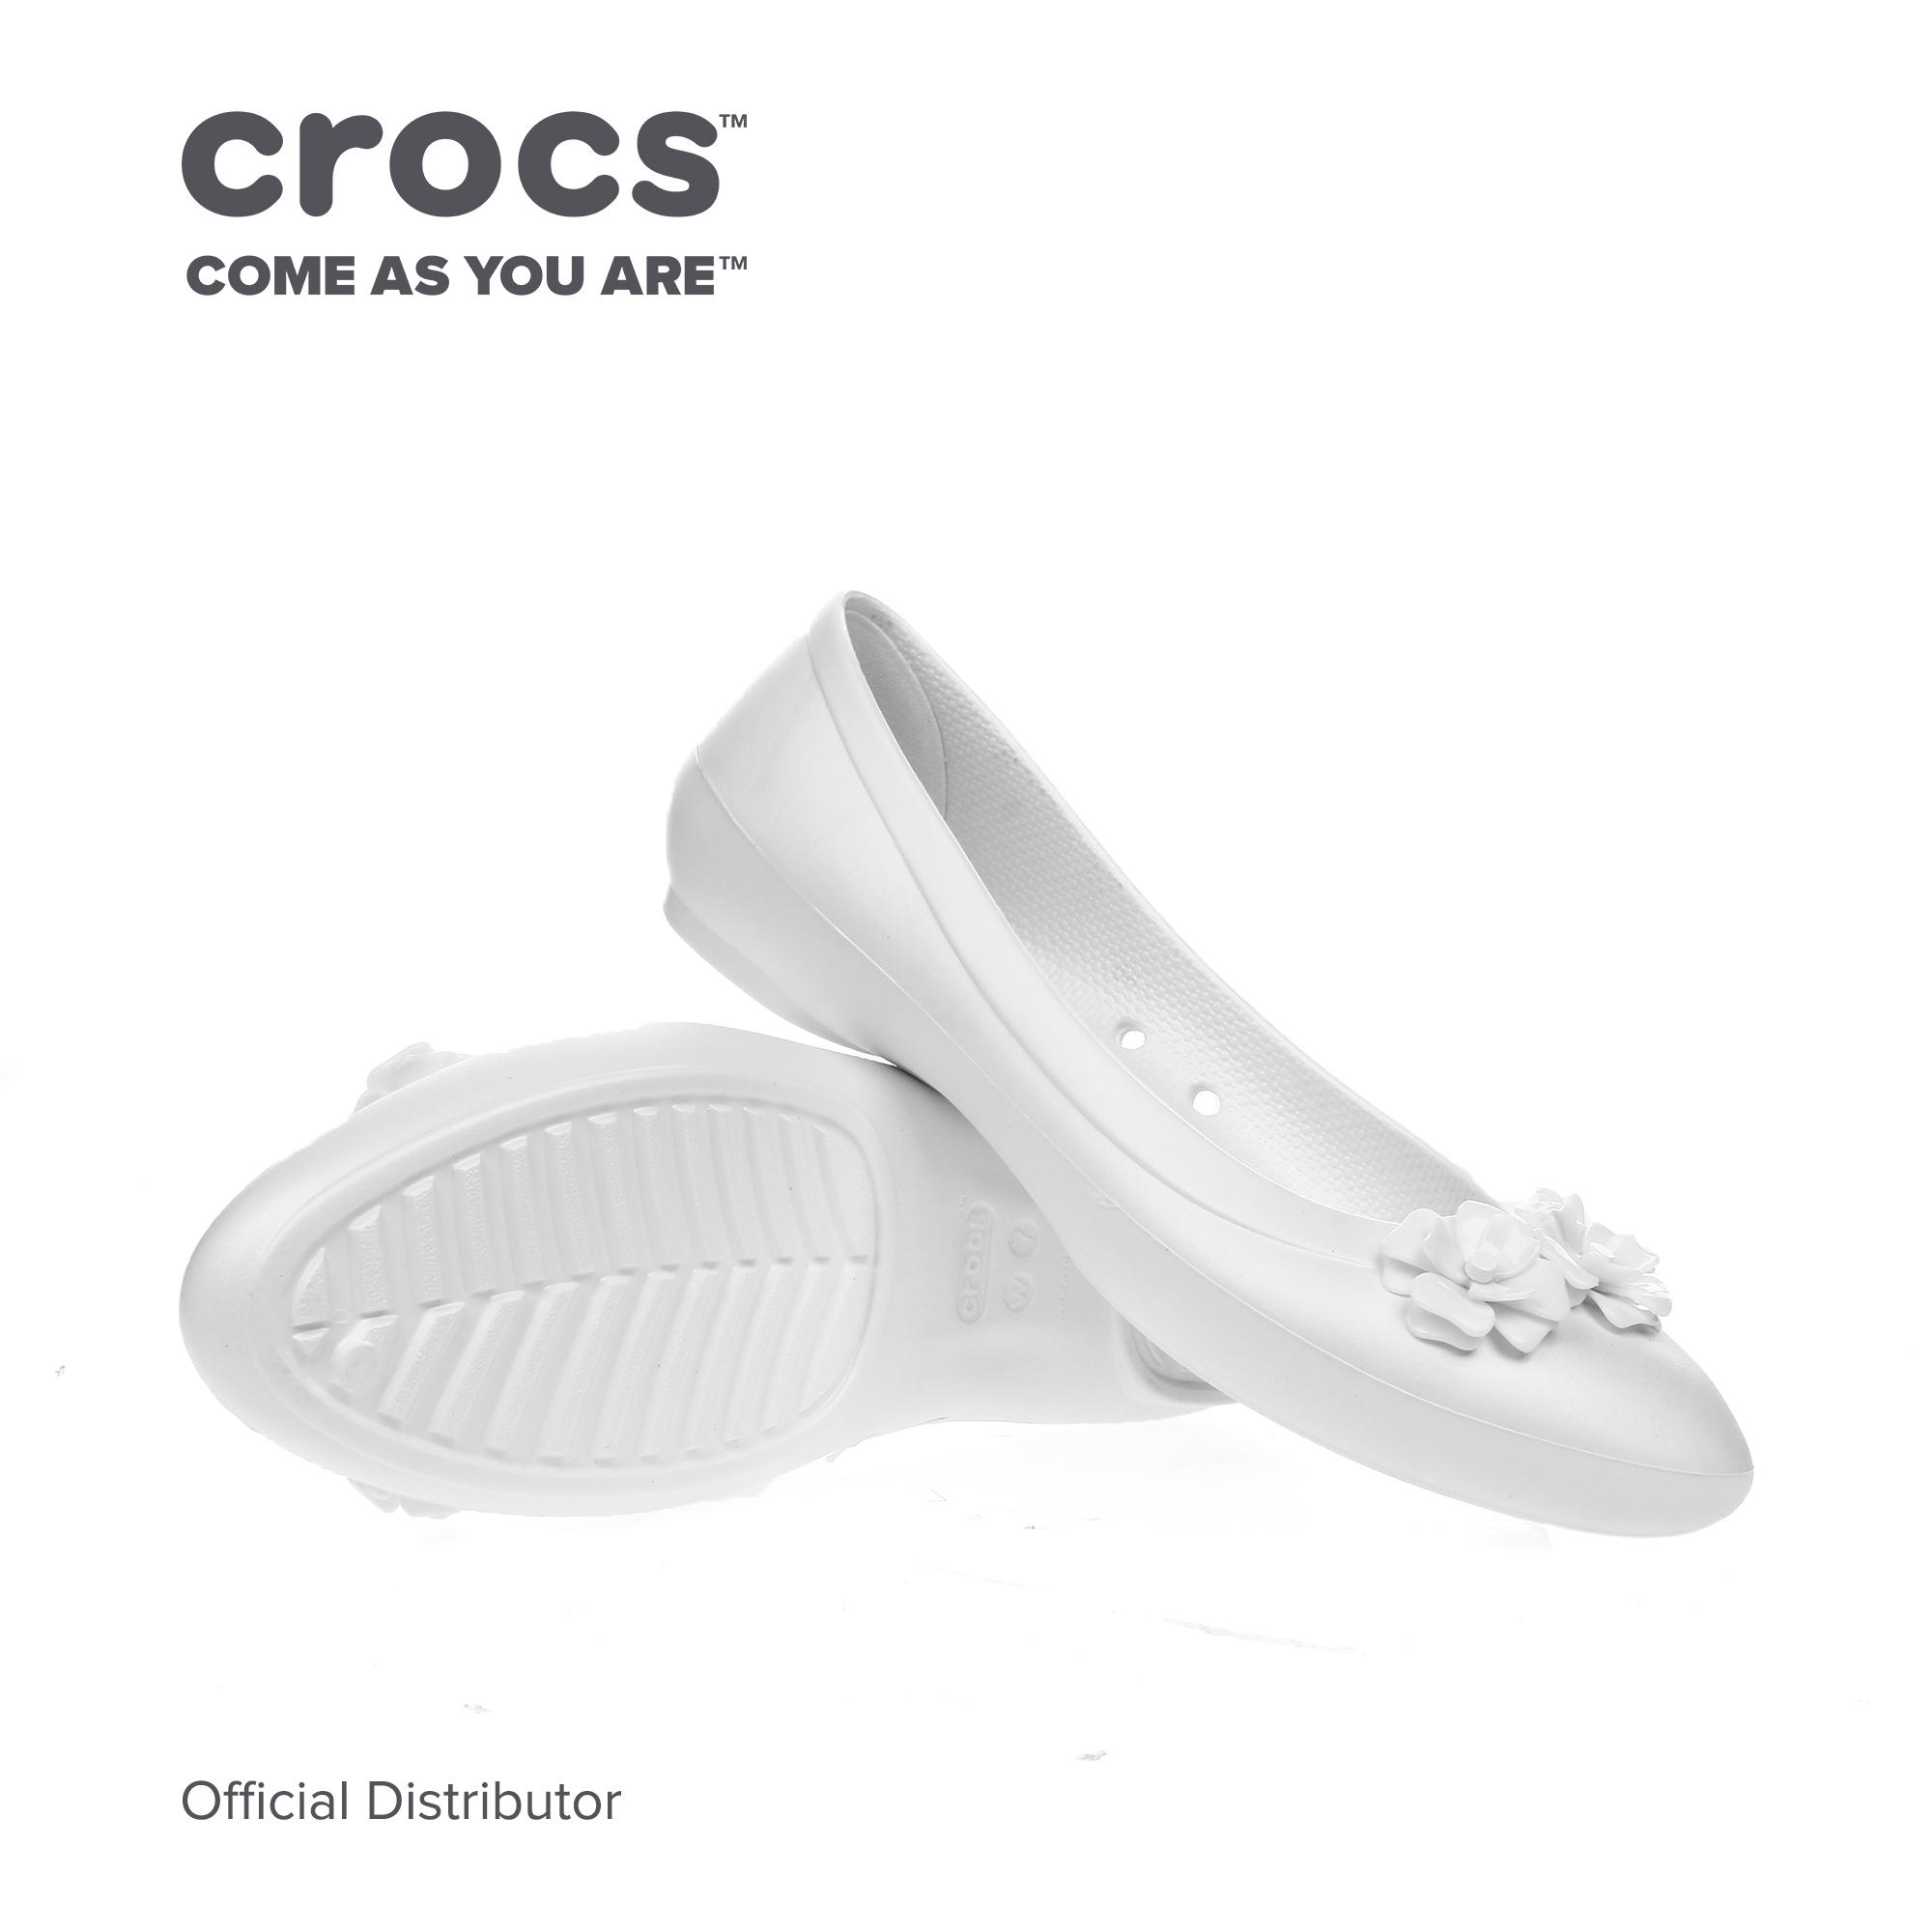 white crocs with flowers